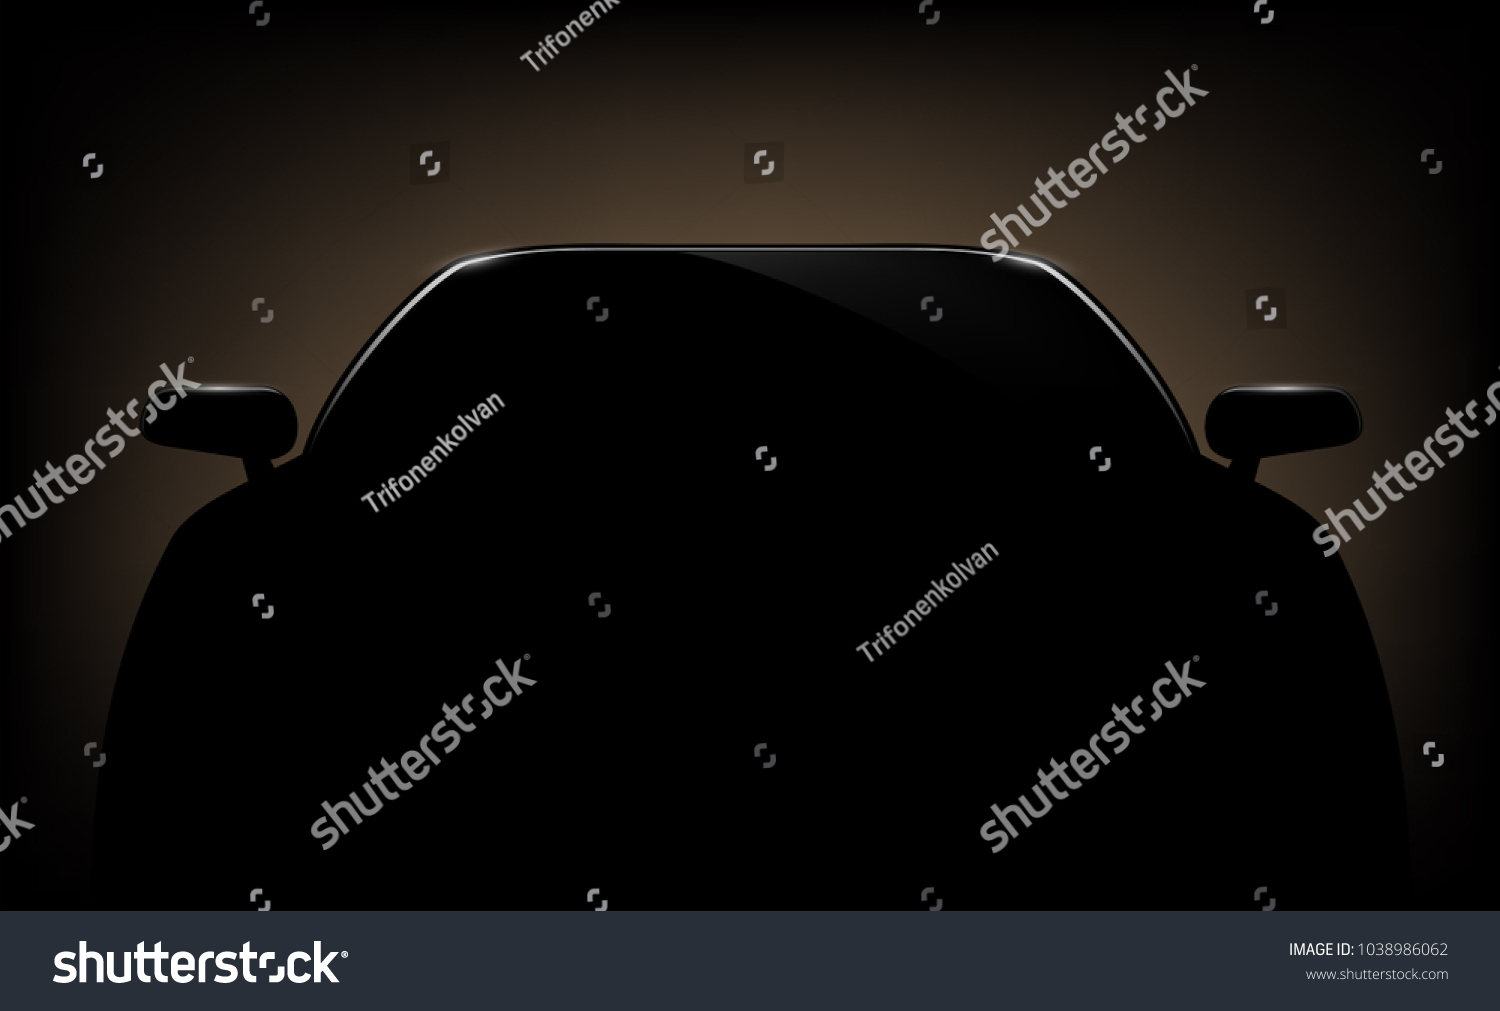 SVG of Silhouette of a automotive car on a dark background. Stock vector illustration. svg